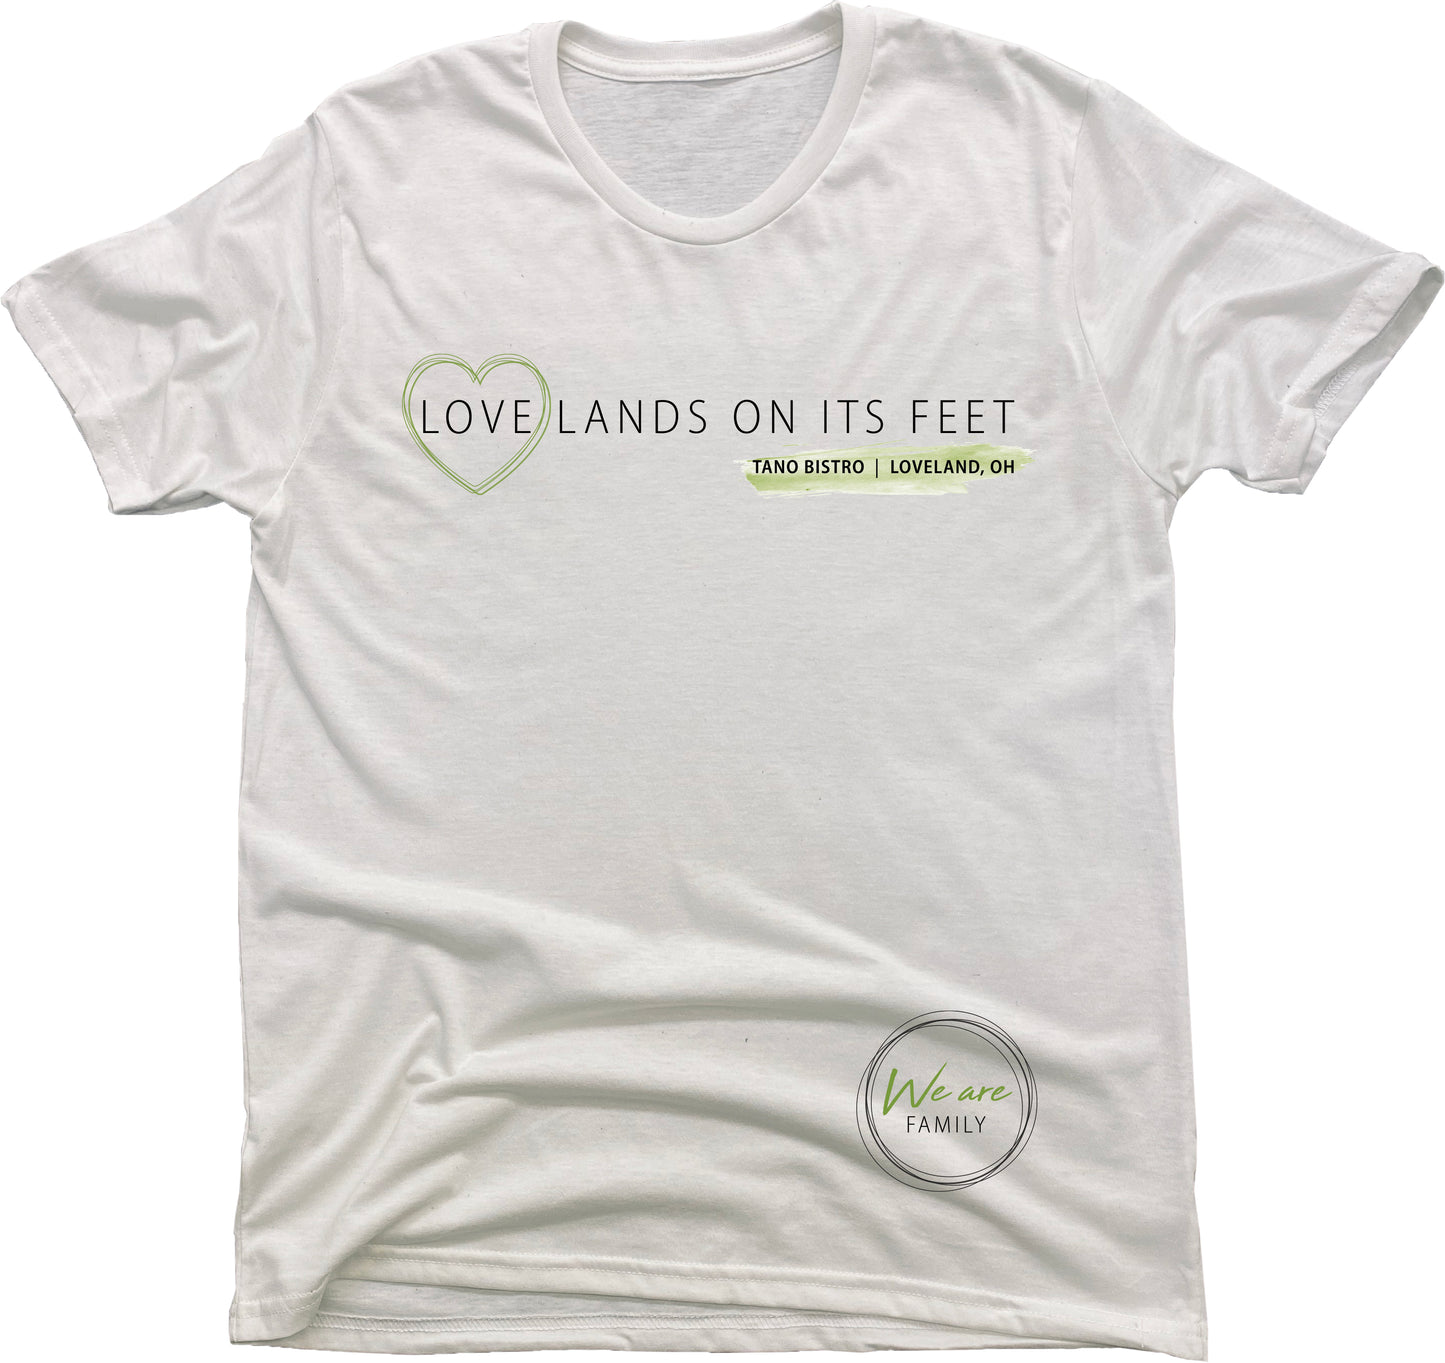 TANO BISTRO | UNISEX WHITE Recycled Tri-Blend | LOVE LANDS ON ITS FEET